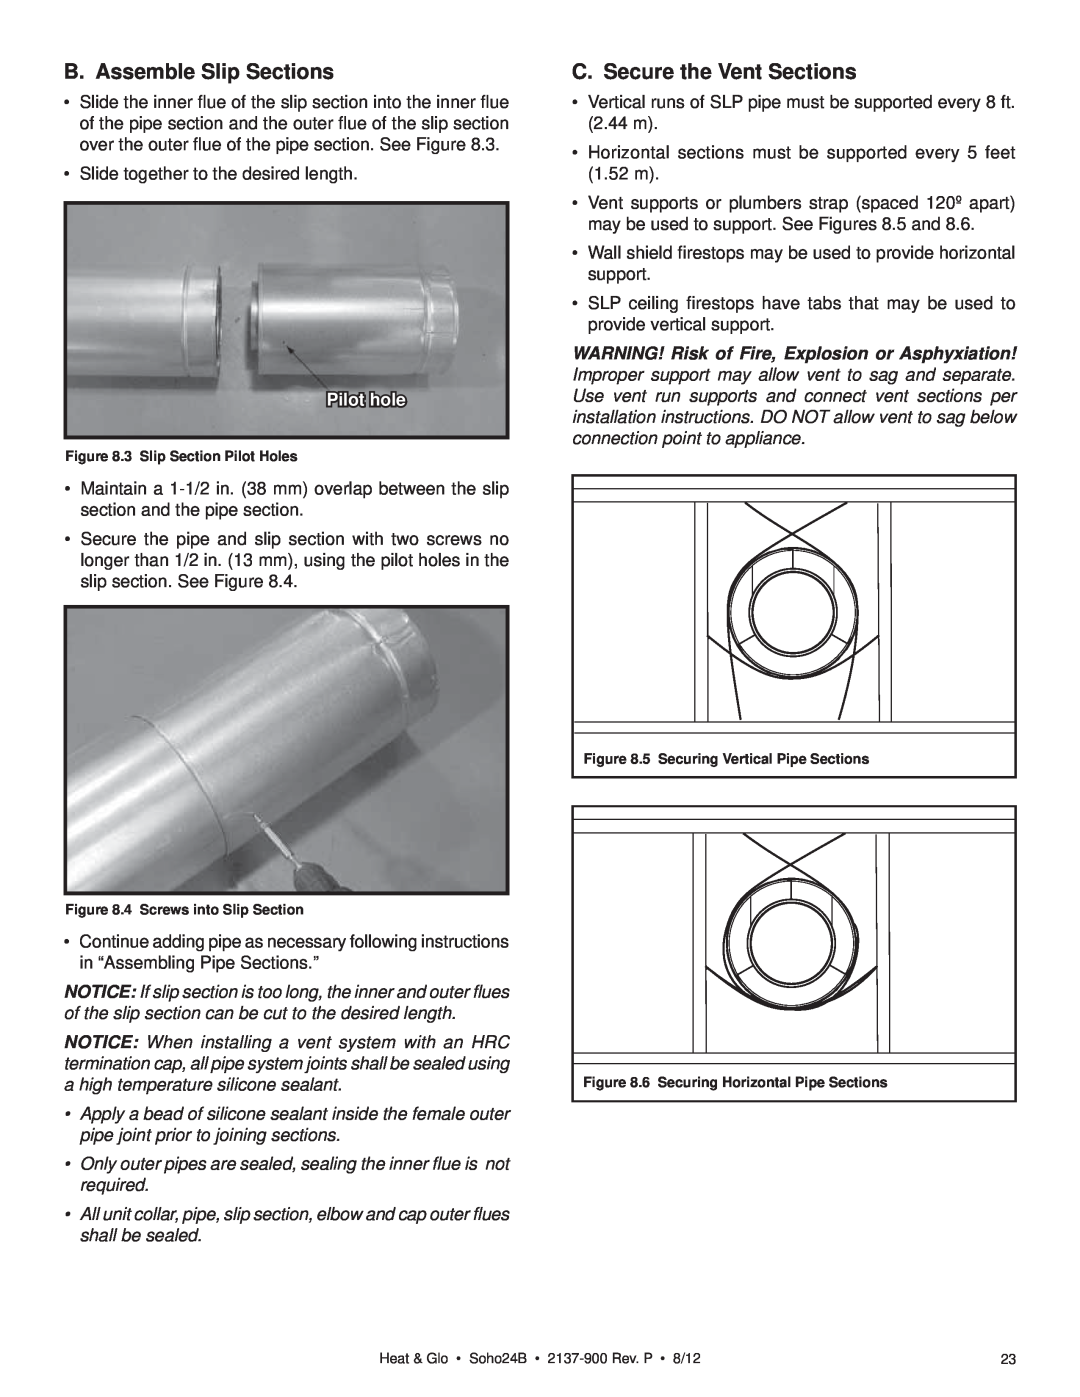 Heat & Glo LifeStyle 2137-900 owner manual B. Assemble Slip Sections, C. Secure the Vent Sections, Pilot hole 